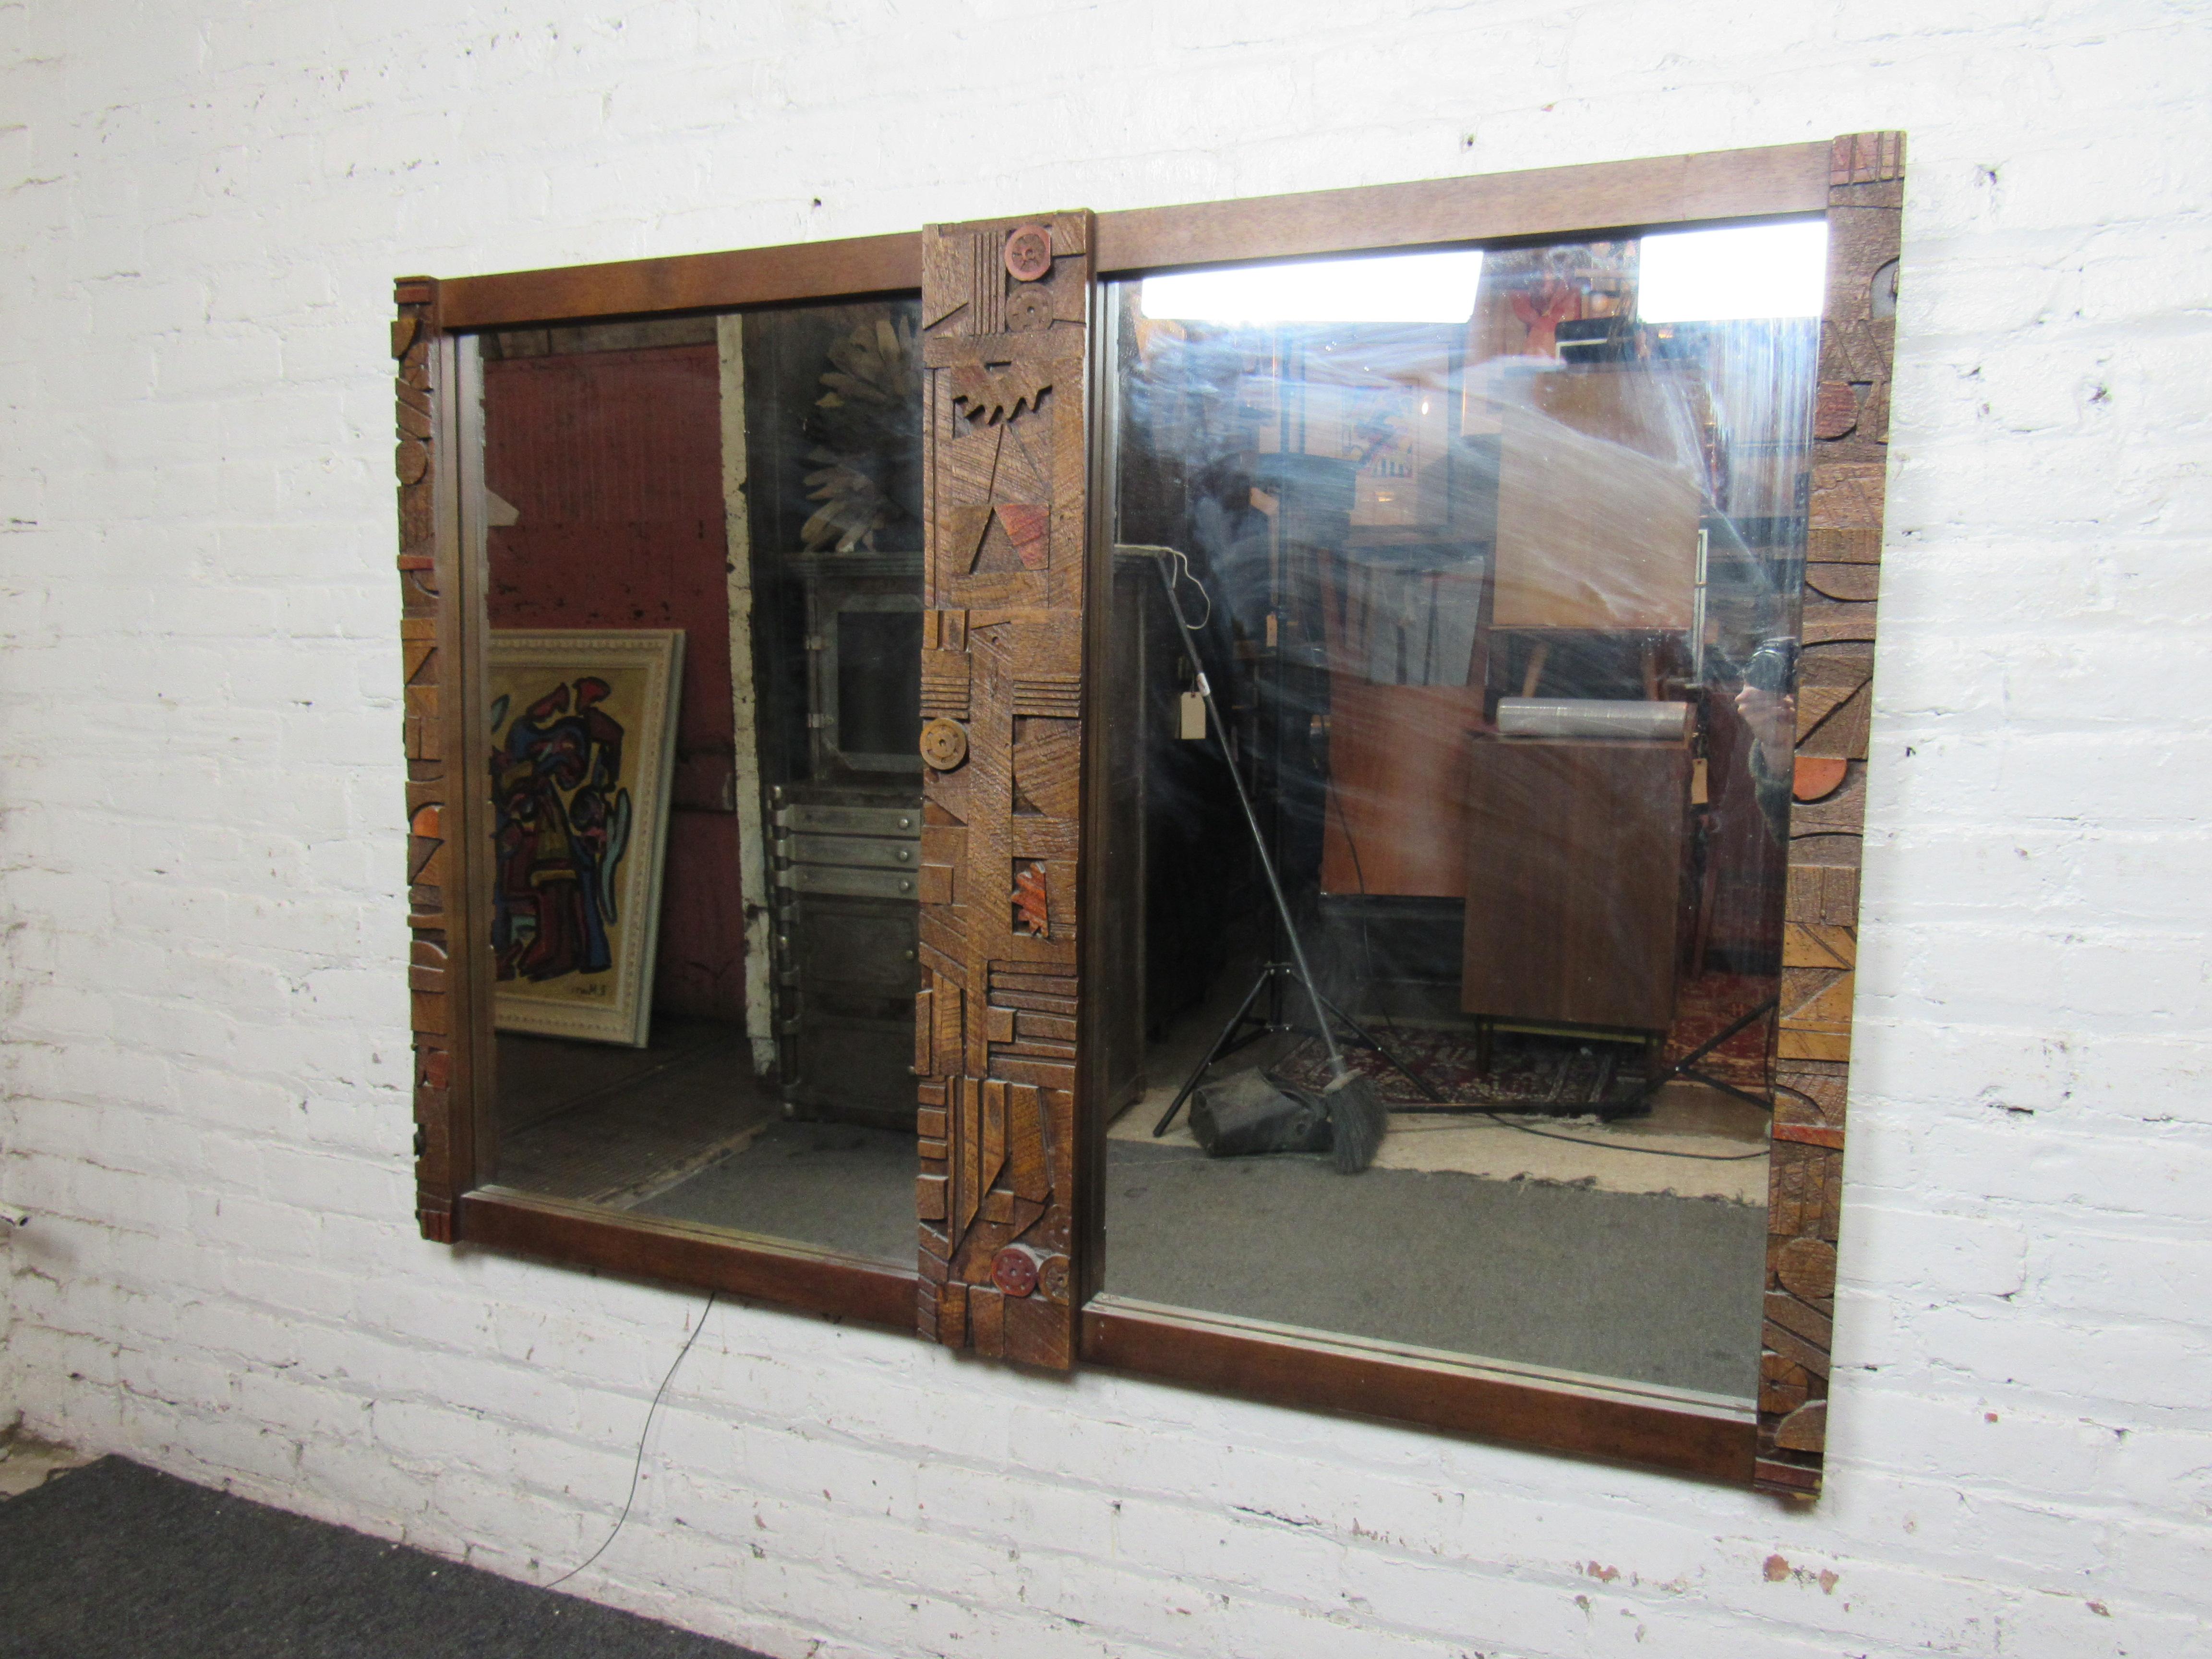 Large wall mirror with mosaic wood frame. Great mid-century brutalist style for home use.
Please confirm location NY or NJ.